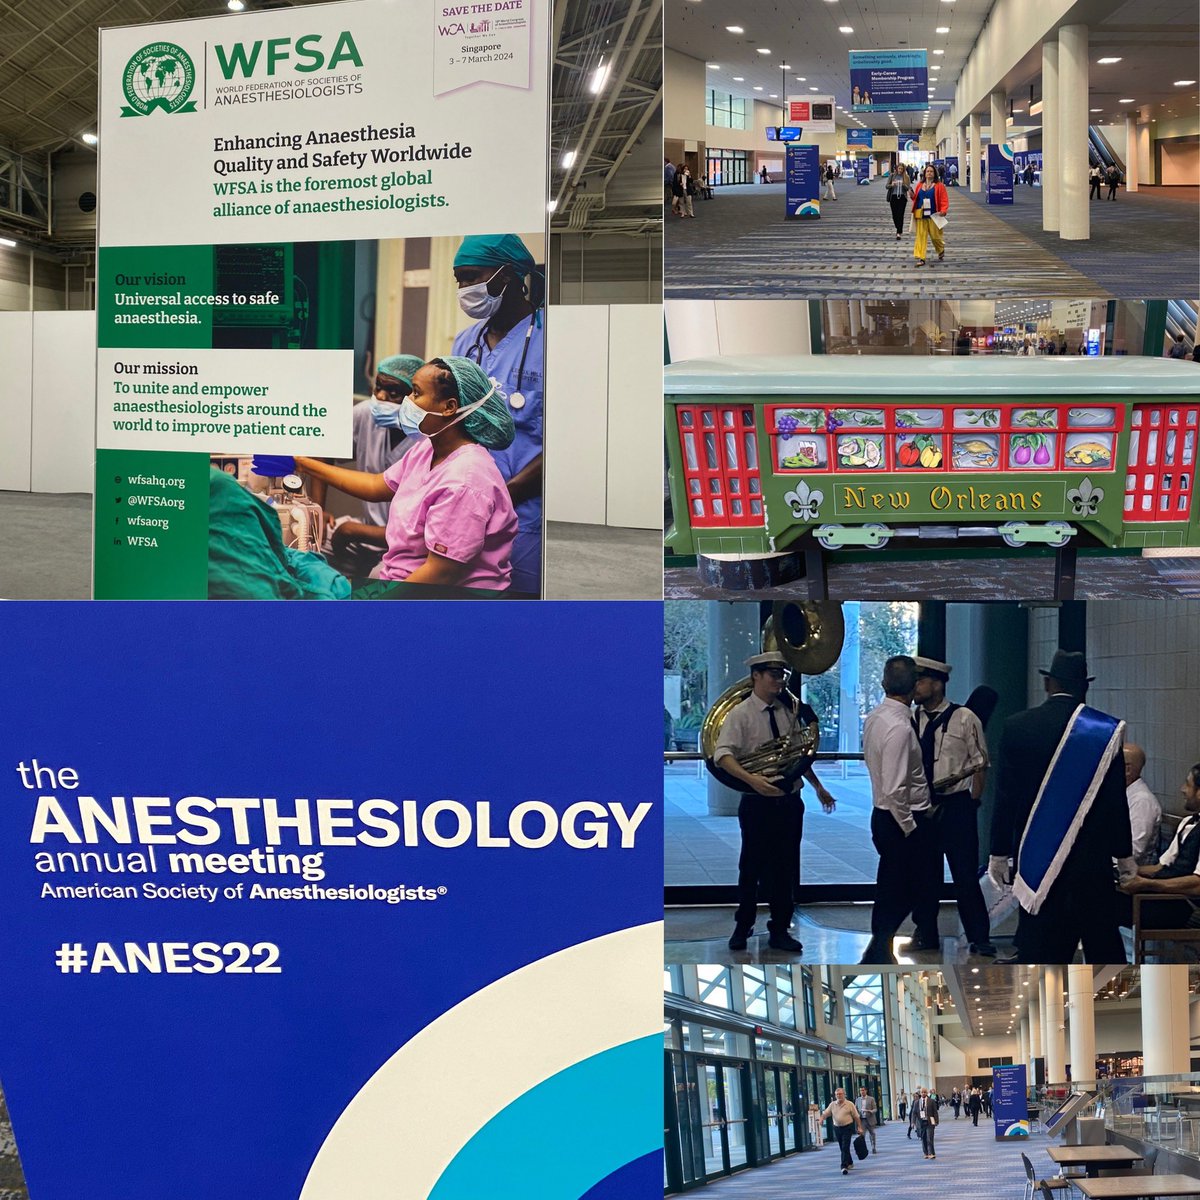 Ready for #ANES22 kick-off in #NewOrleans. Come see us in the Int’l Pavillion to talk #globalanesthesia, #advocacy & more